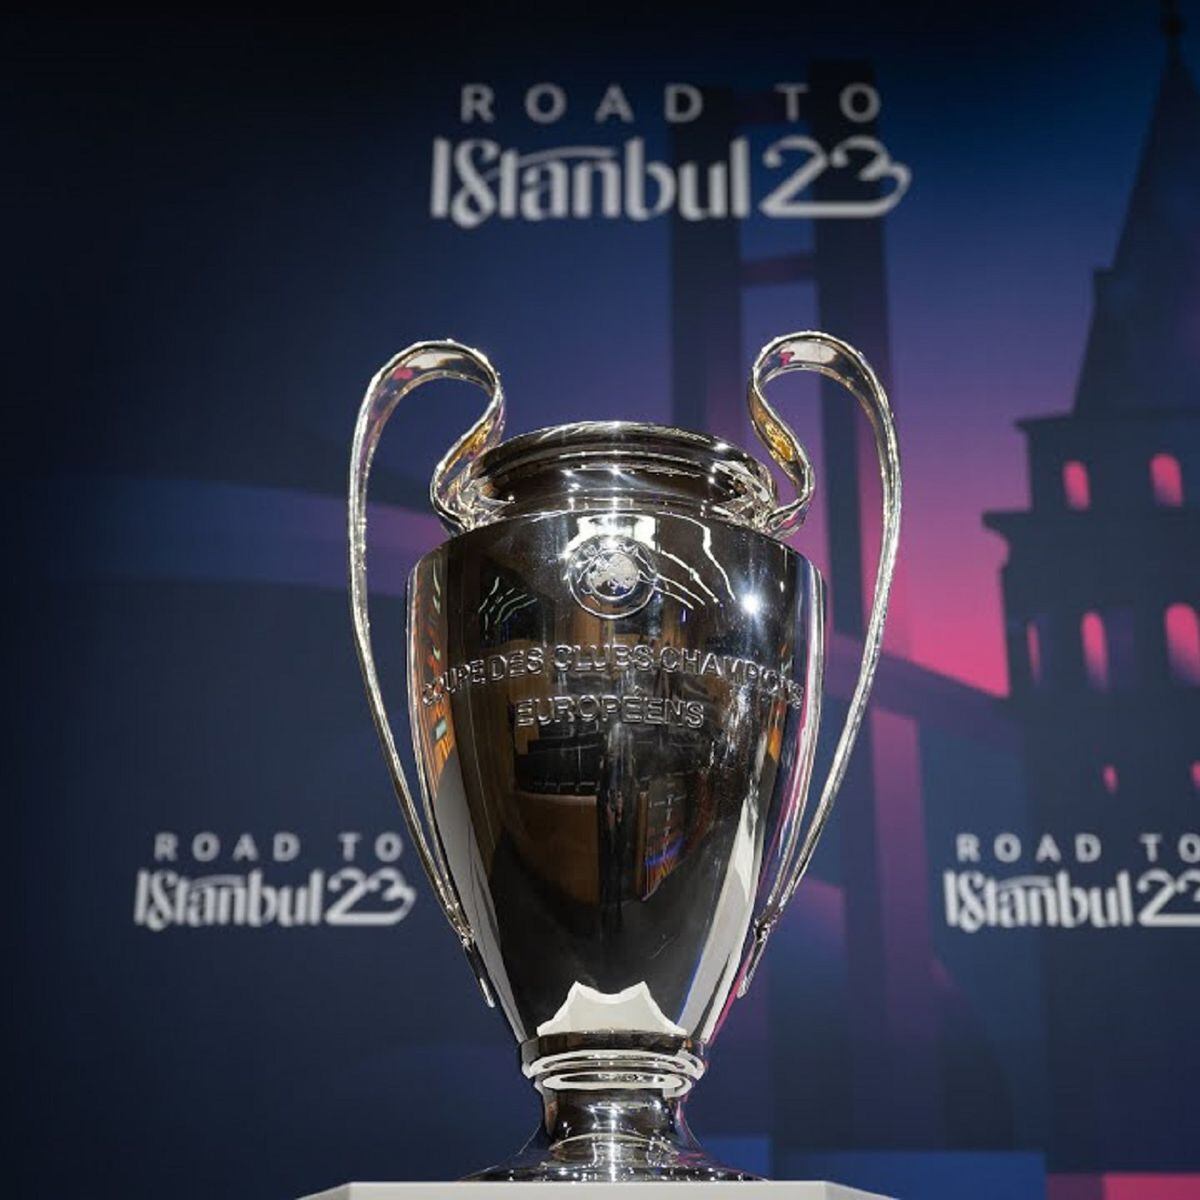 La Liga has five clubs in the 2023/24 Champions League - Here's what to  expect - Football España